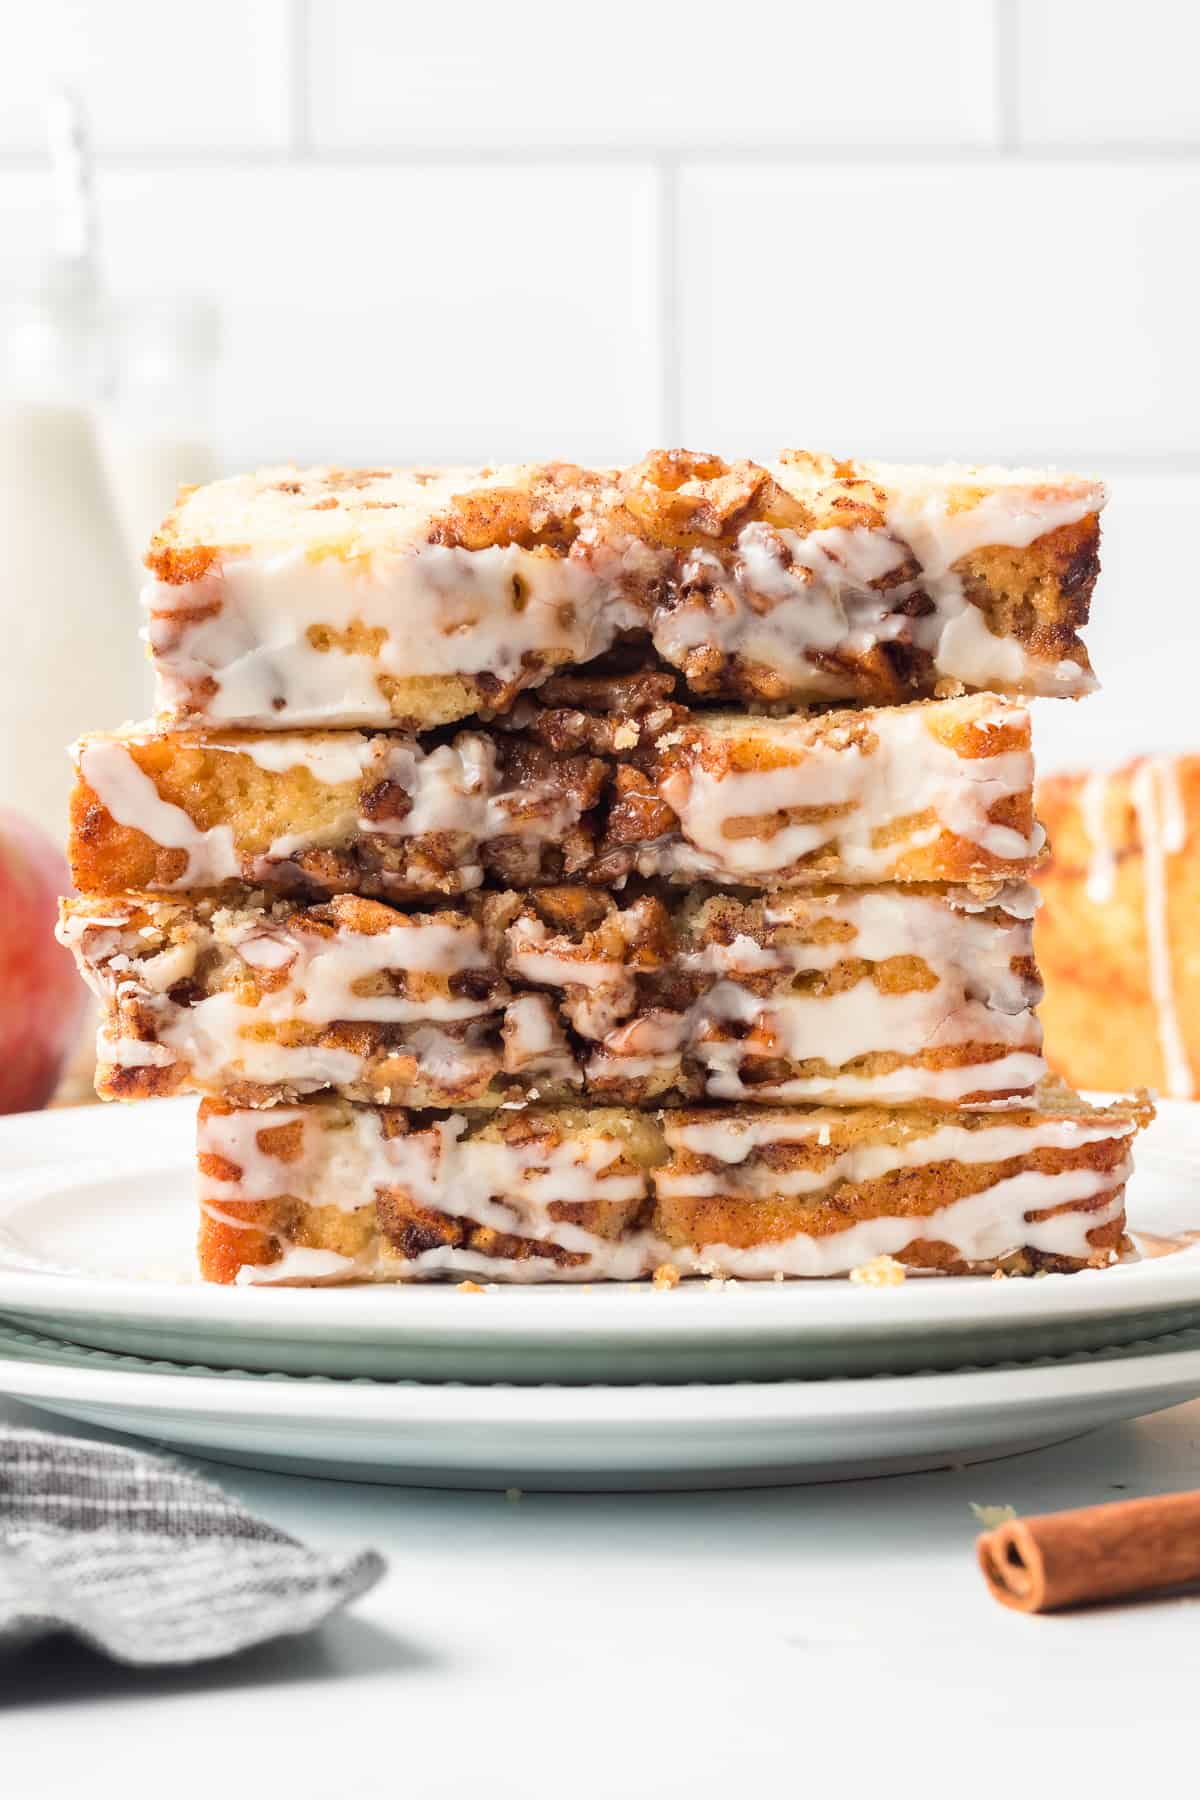 Slices of glazed apple fritter bread stacked on a white plate.